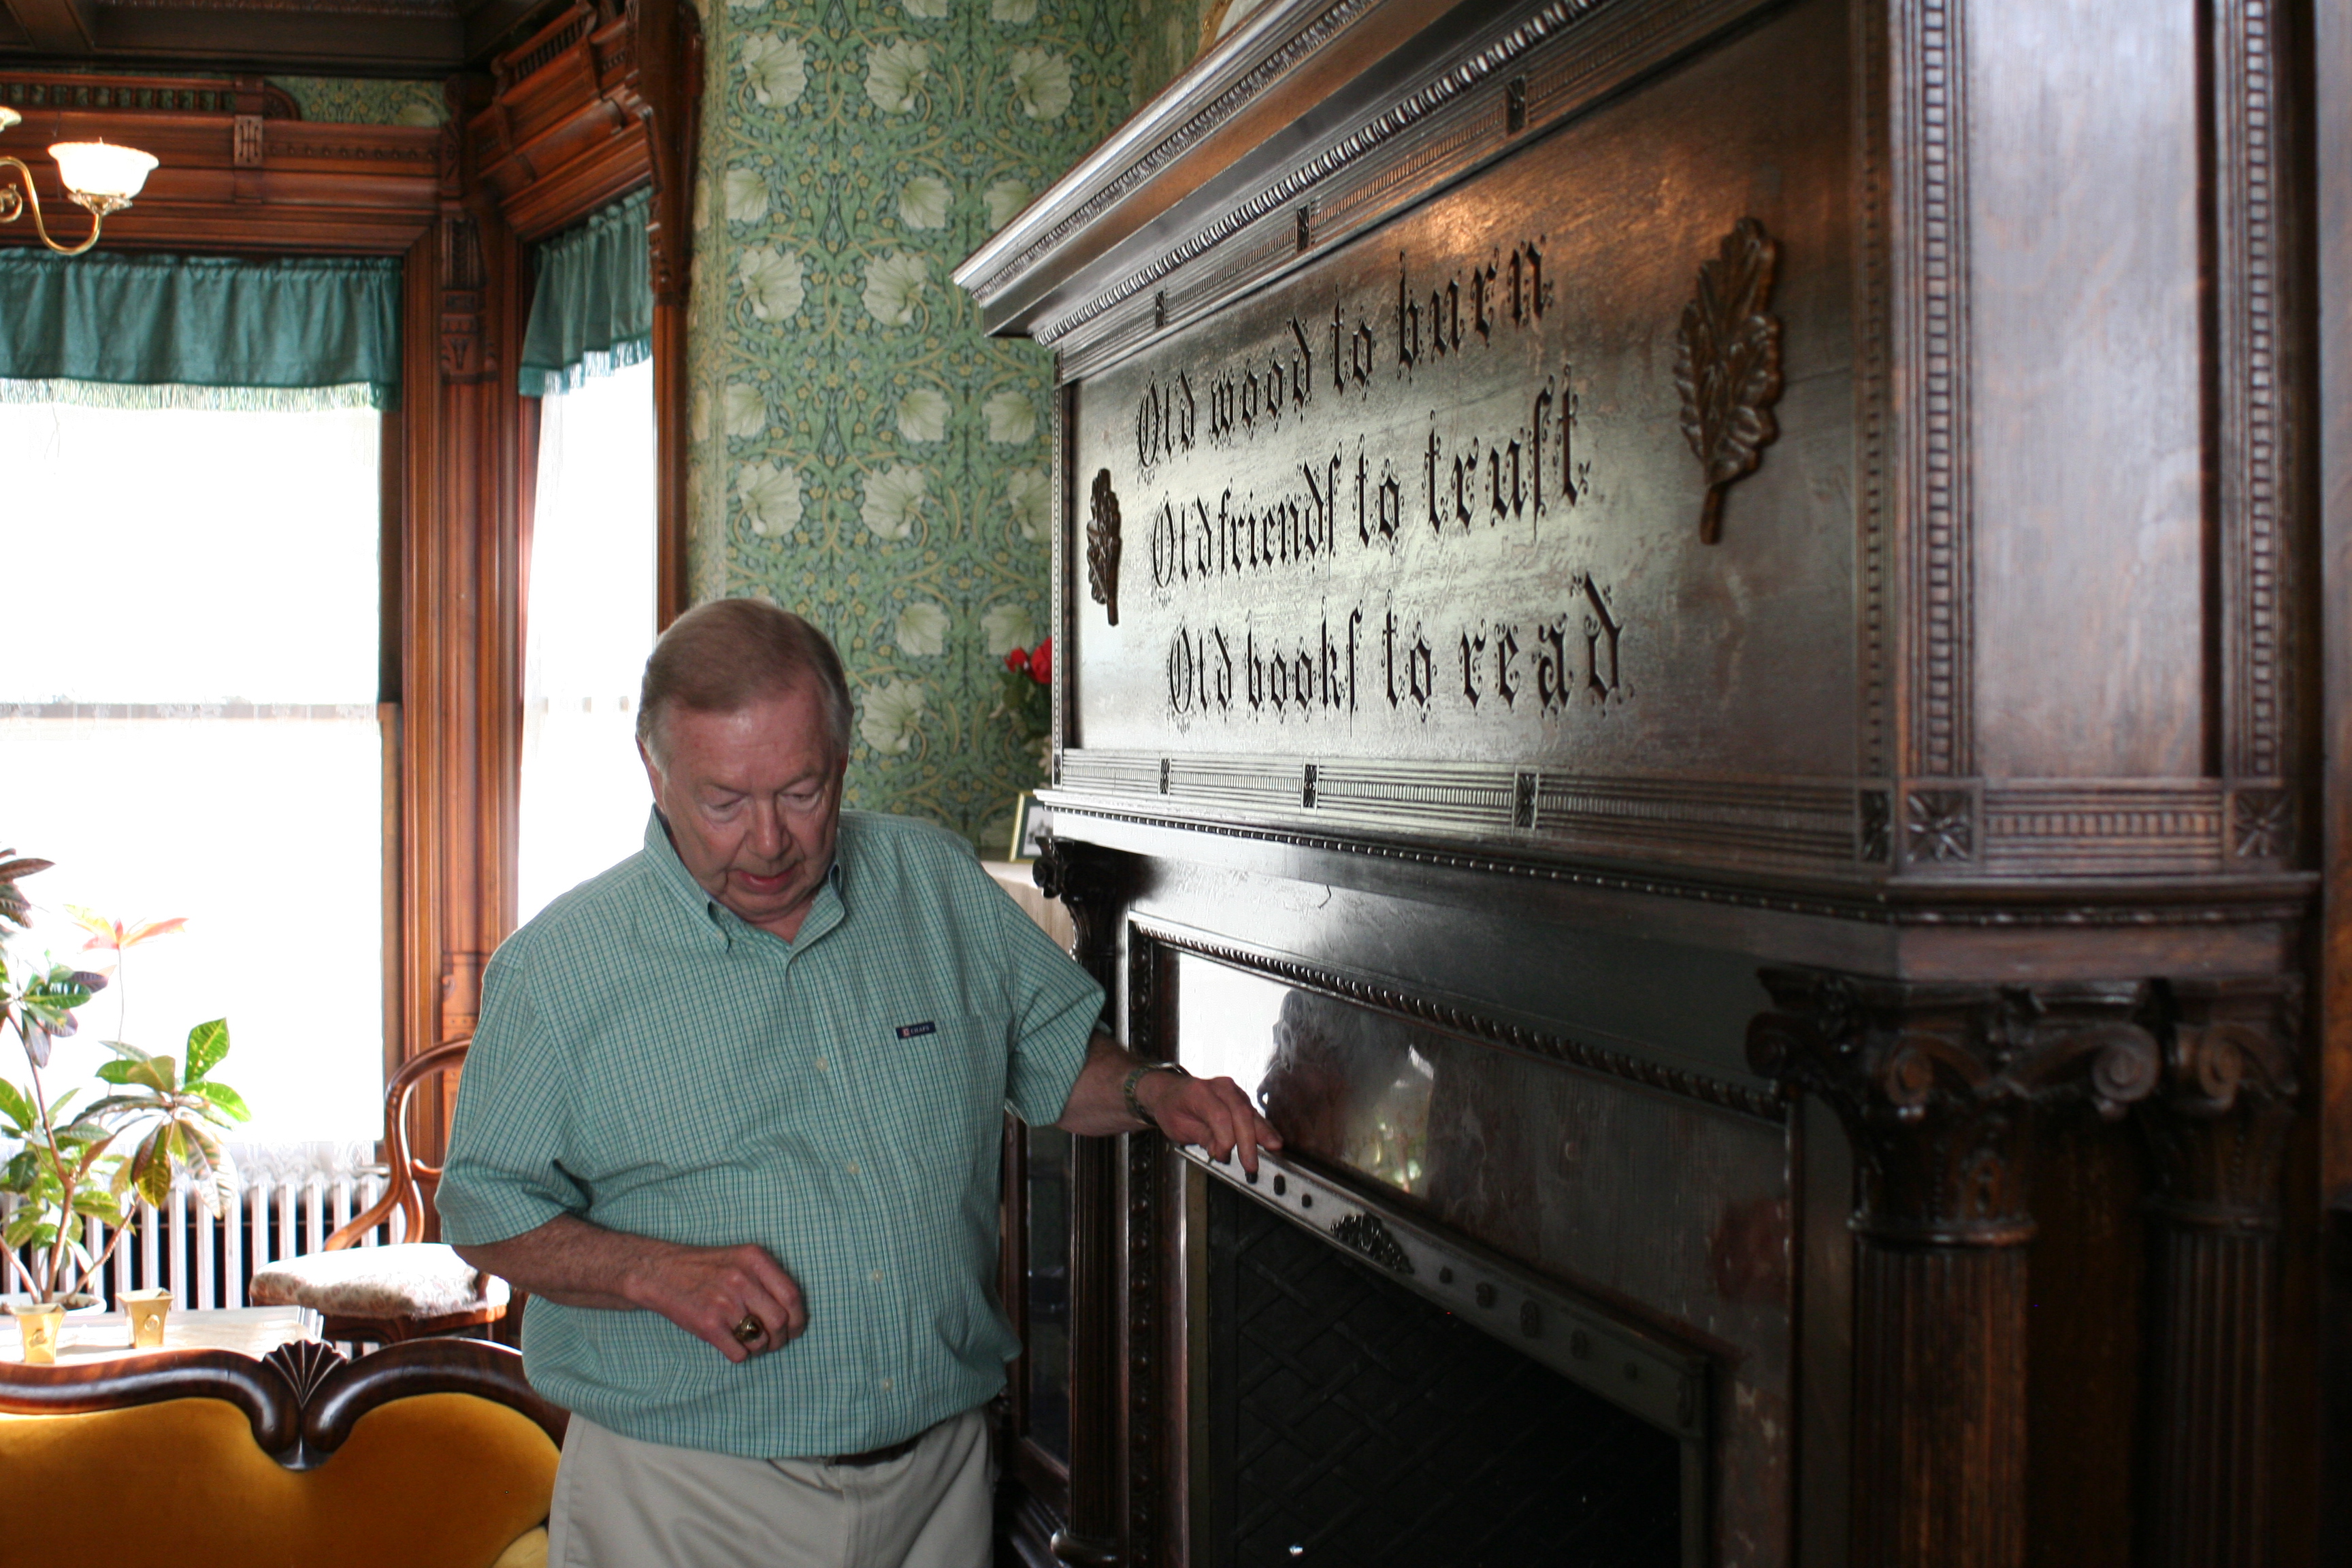 The center's curator stands in front of one of its many fireplaces.